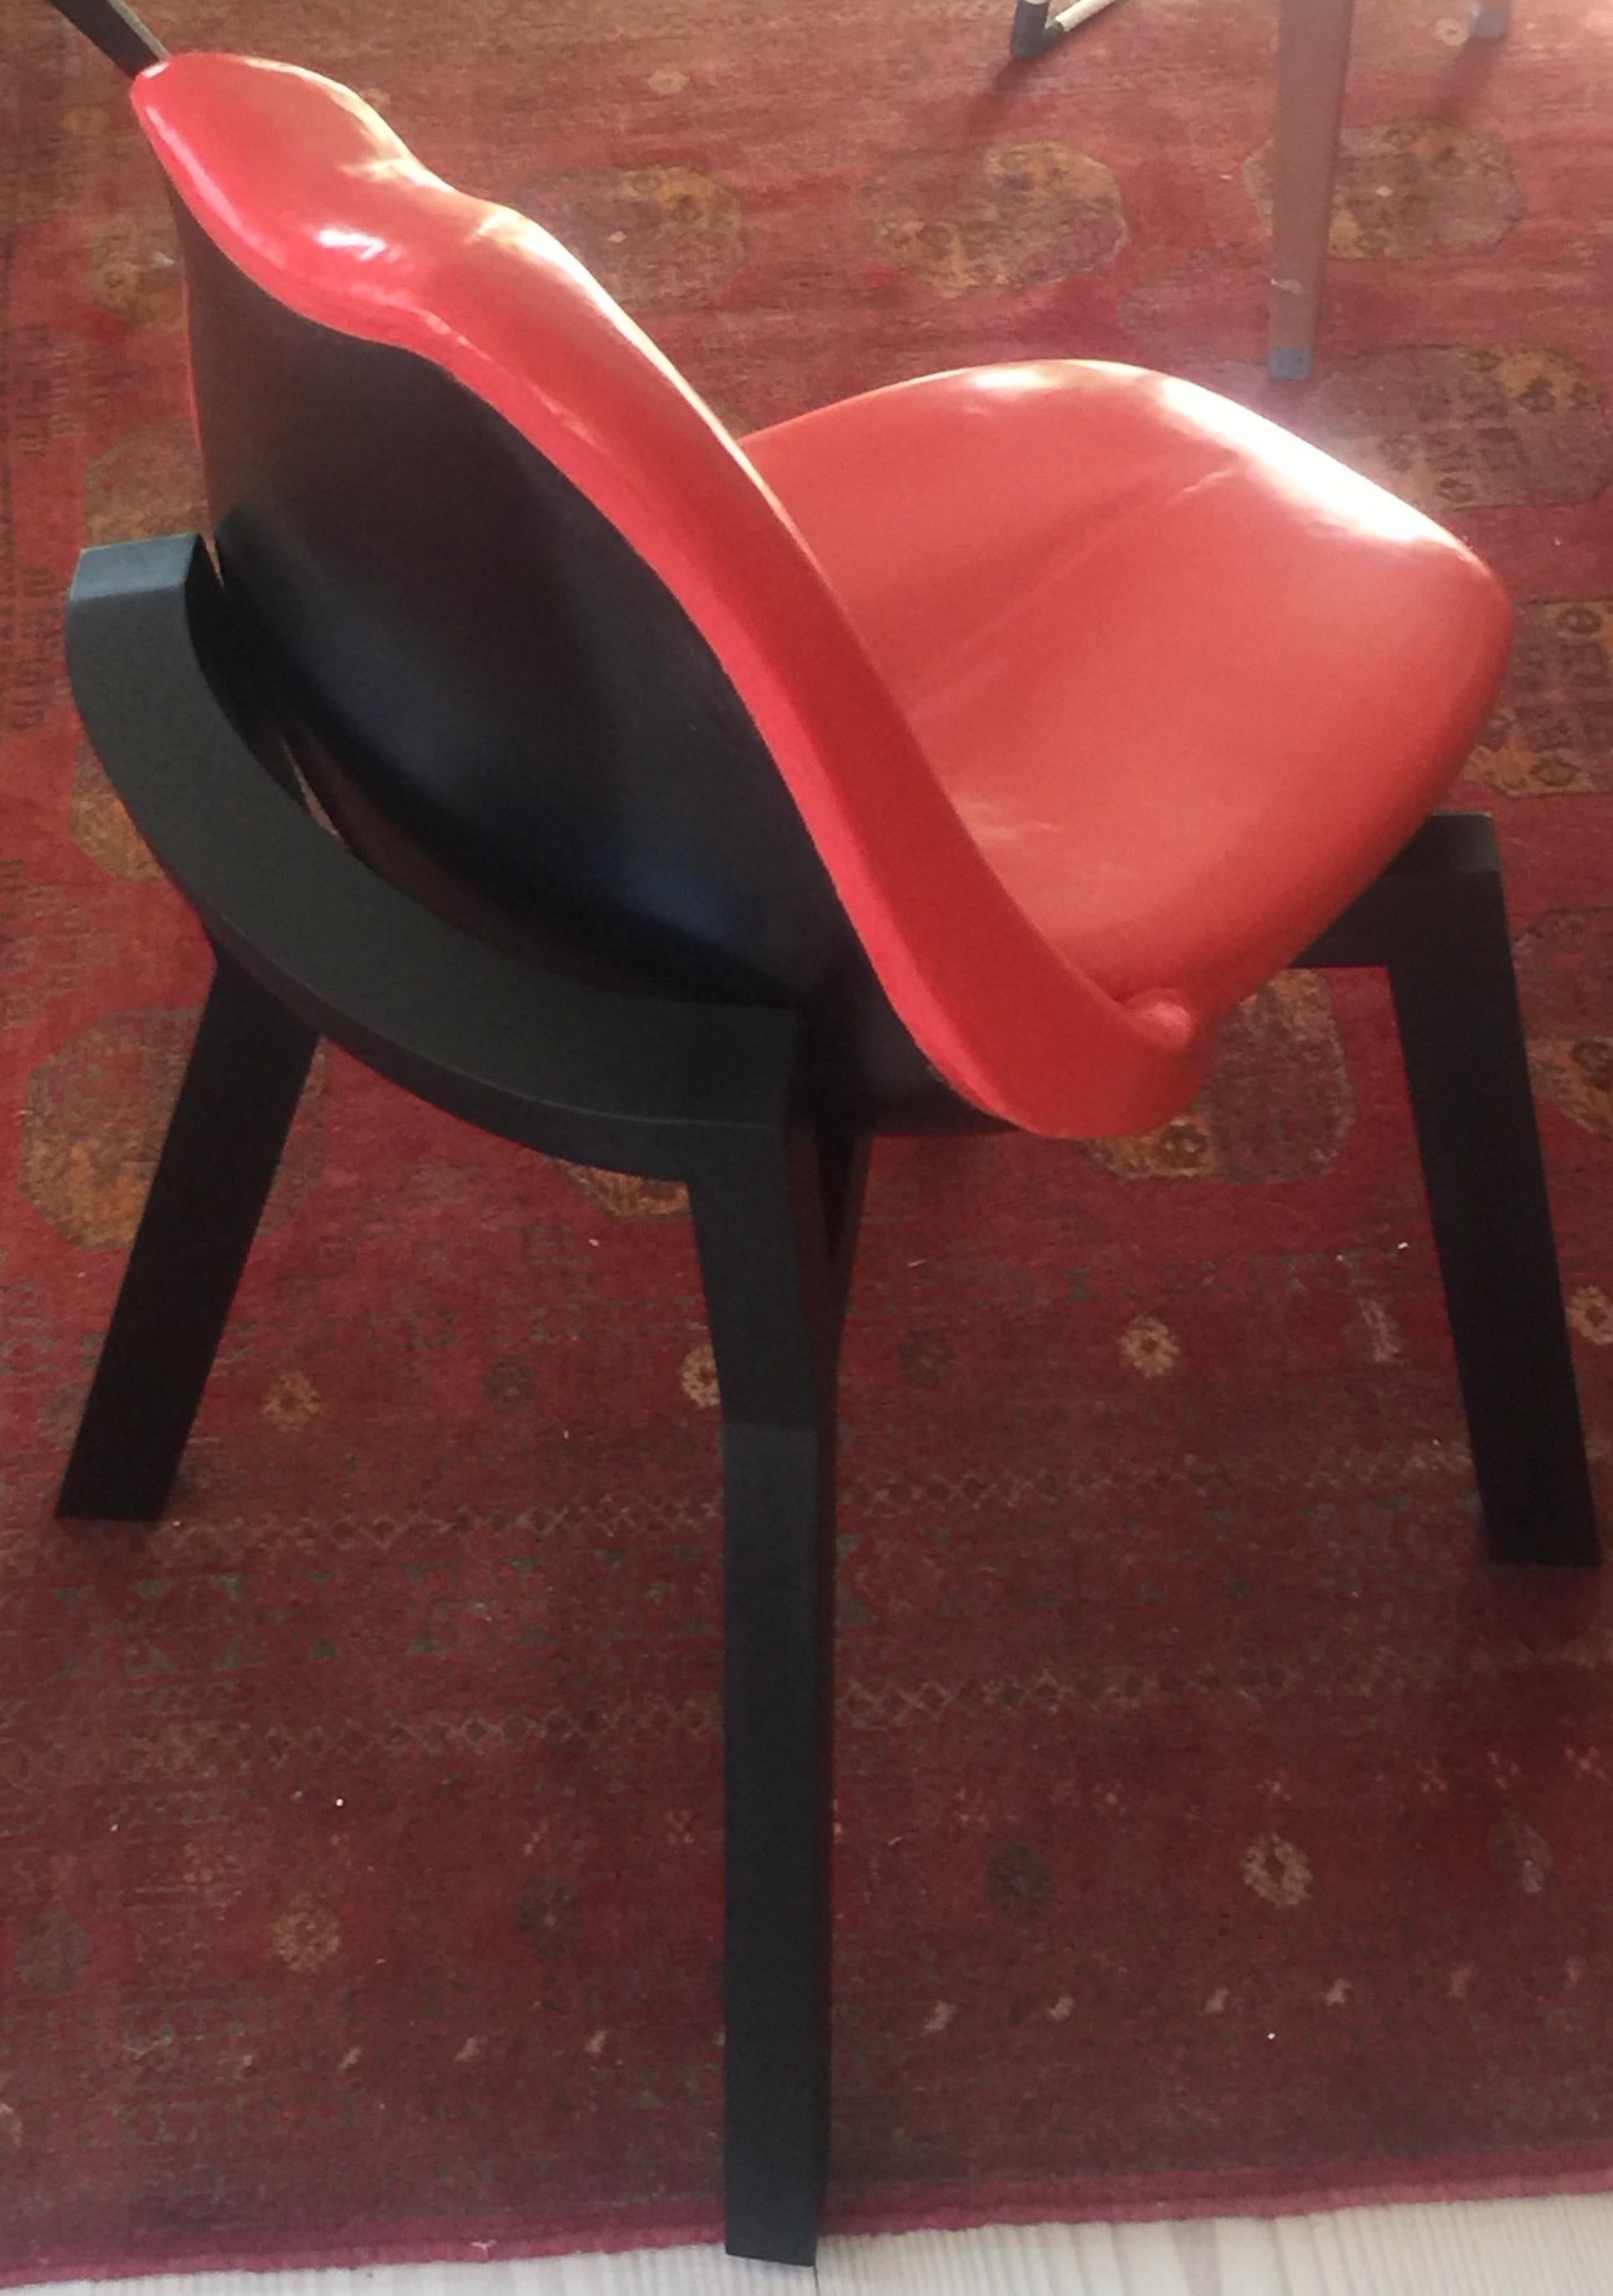 The Tongue and lip chair handmade in Denmark 2021 By the Danish architect Mogens Toft.
The chair consists of a seat/back which is a fiberglass shell covered with 3D milled polyurethane foam which gives a comfortable seat the surface is treated with